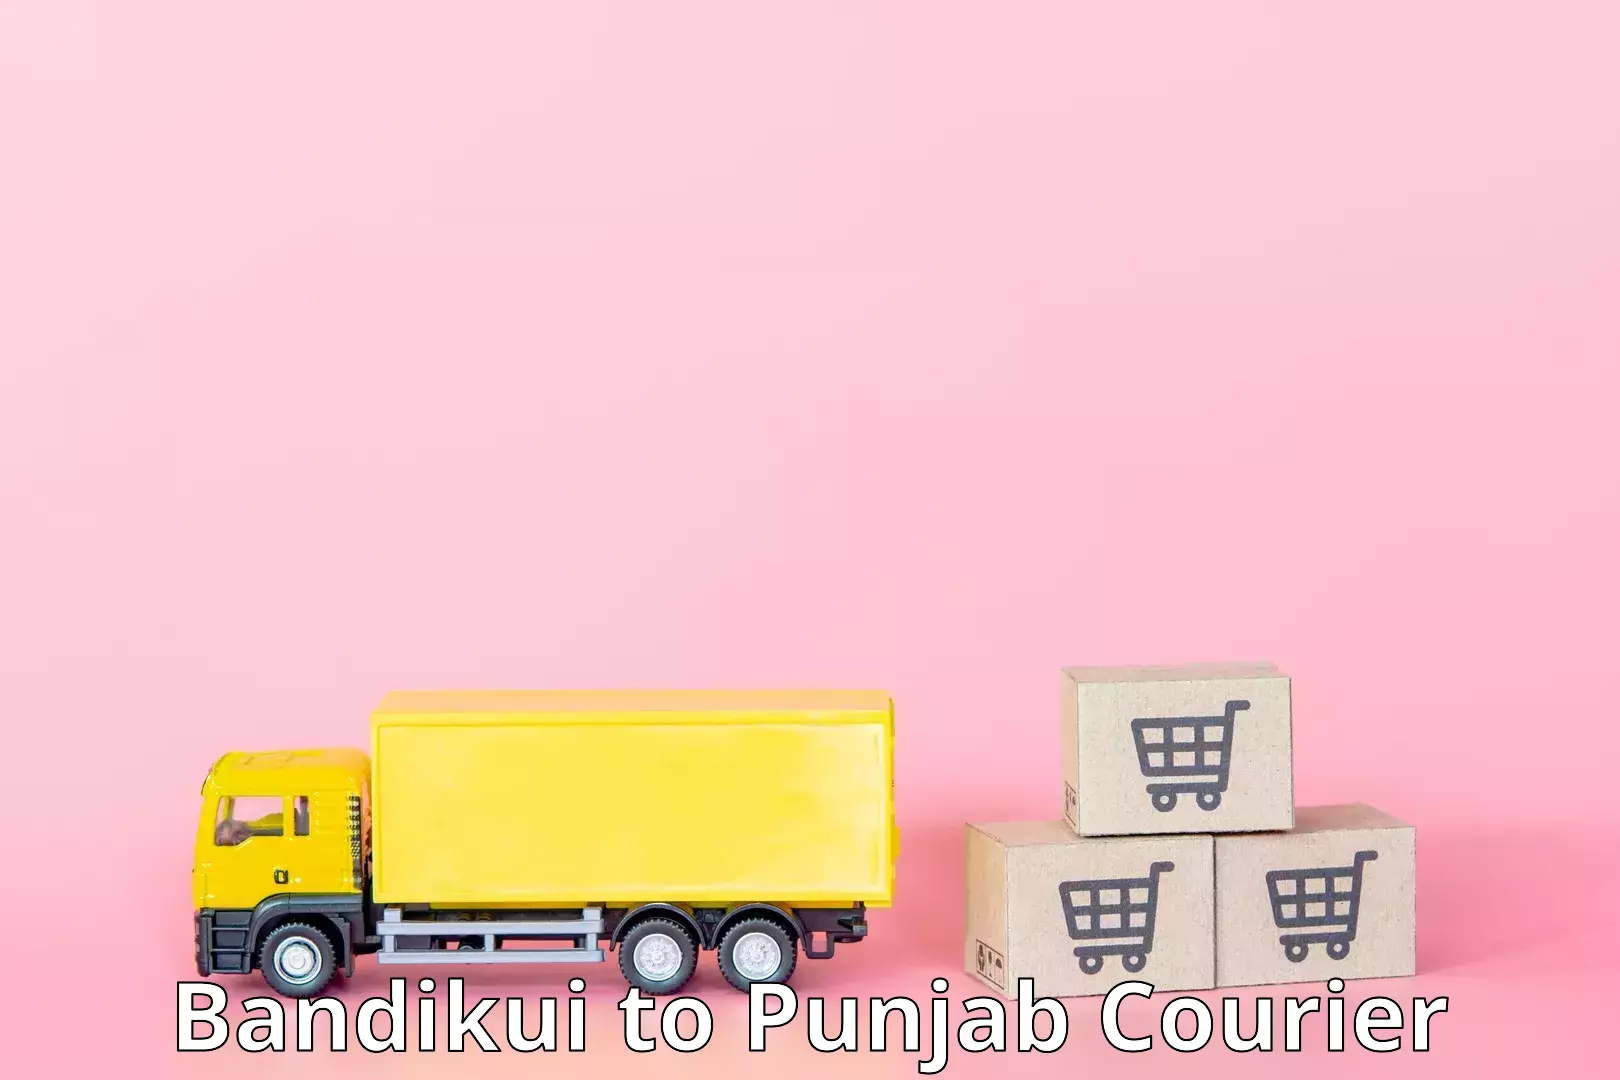 Multi-national courier services Bandikui to Pathankot